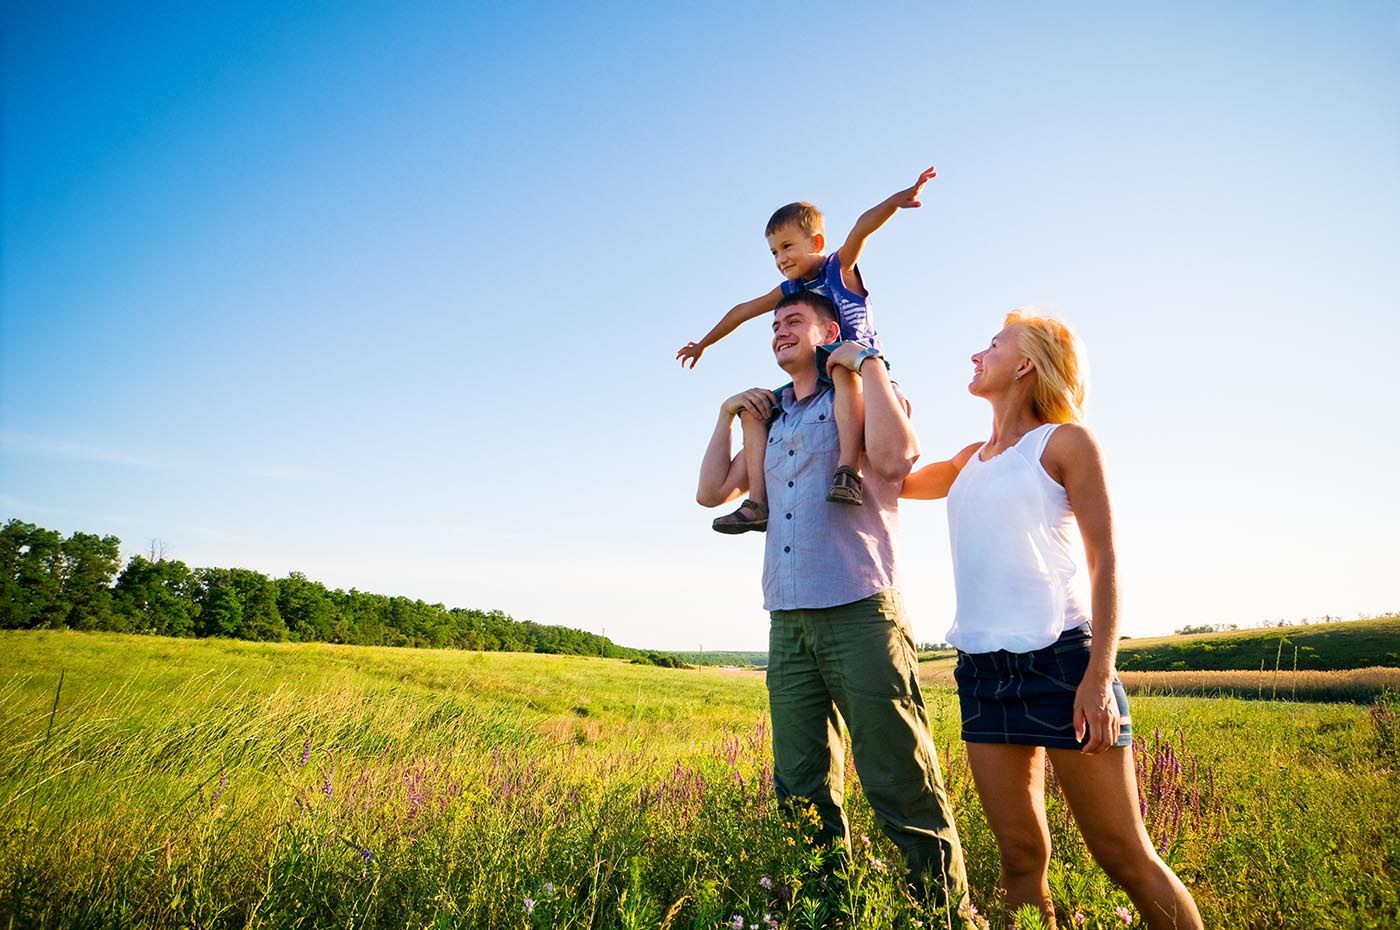 A couple with a child stands in a field, enjoying the serene surroundings and the beauty of nature.